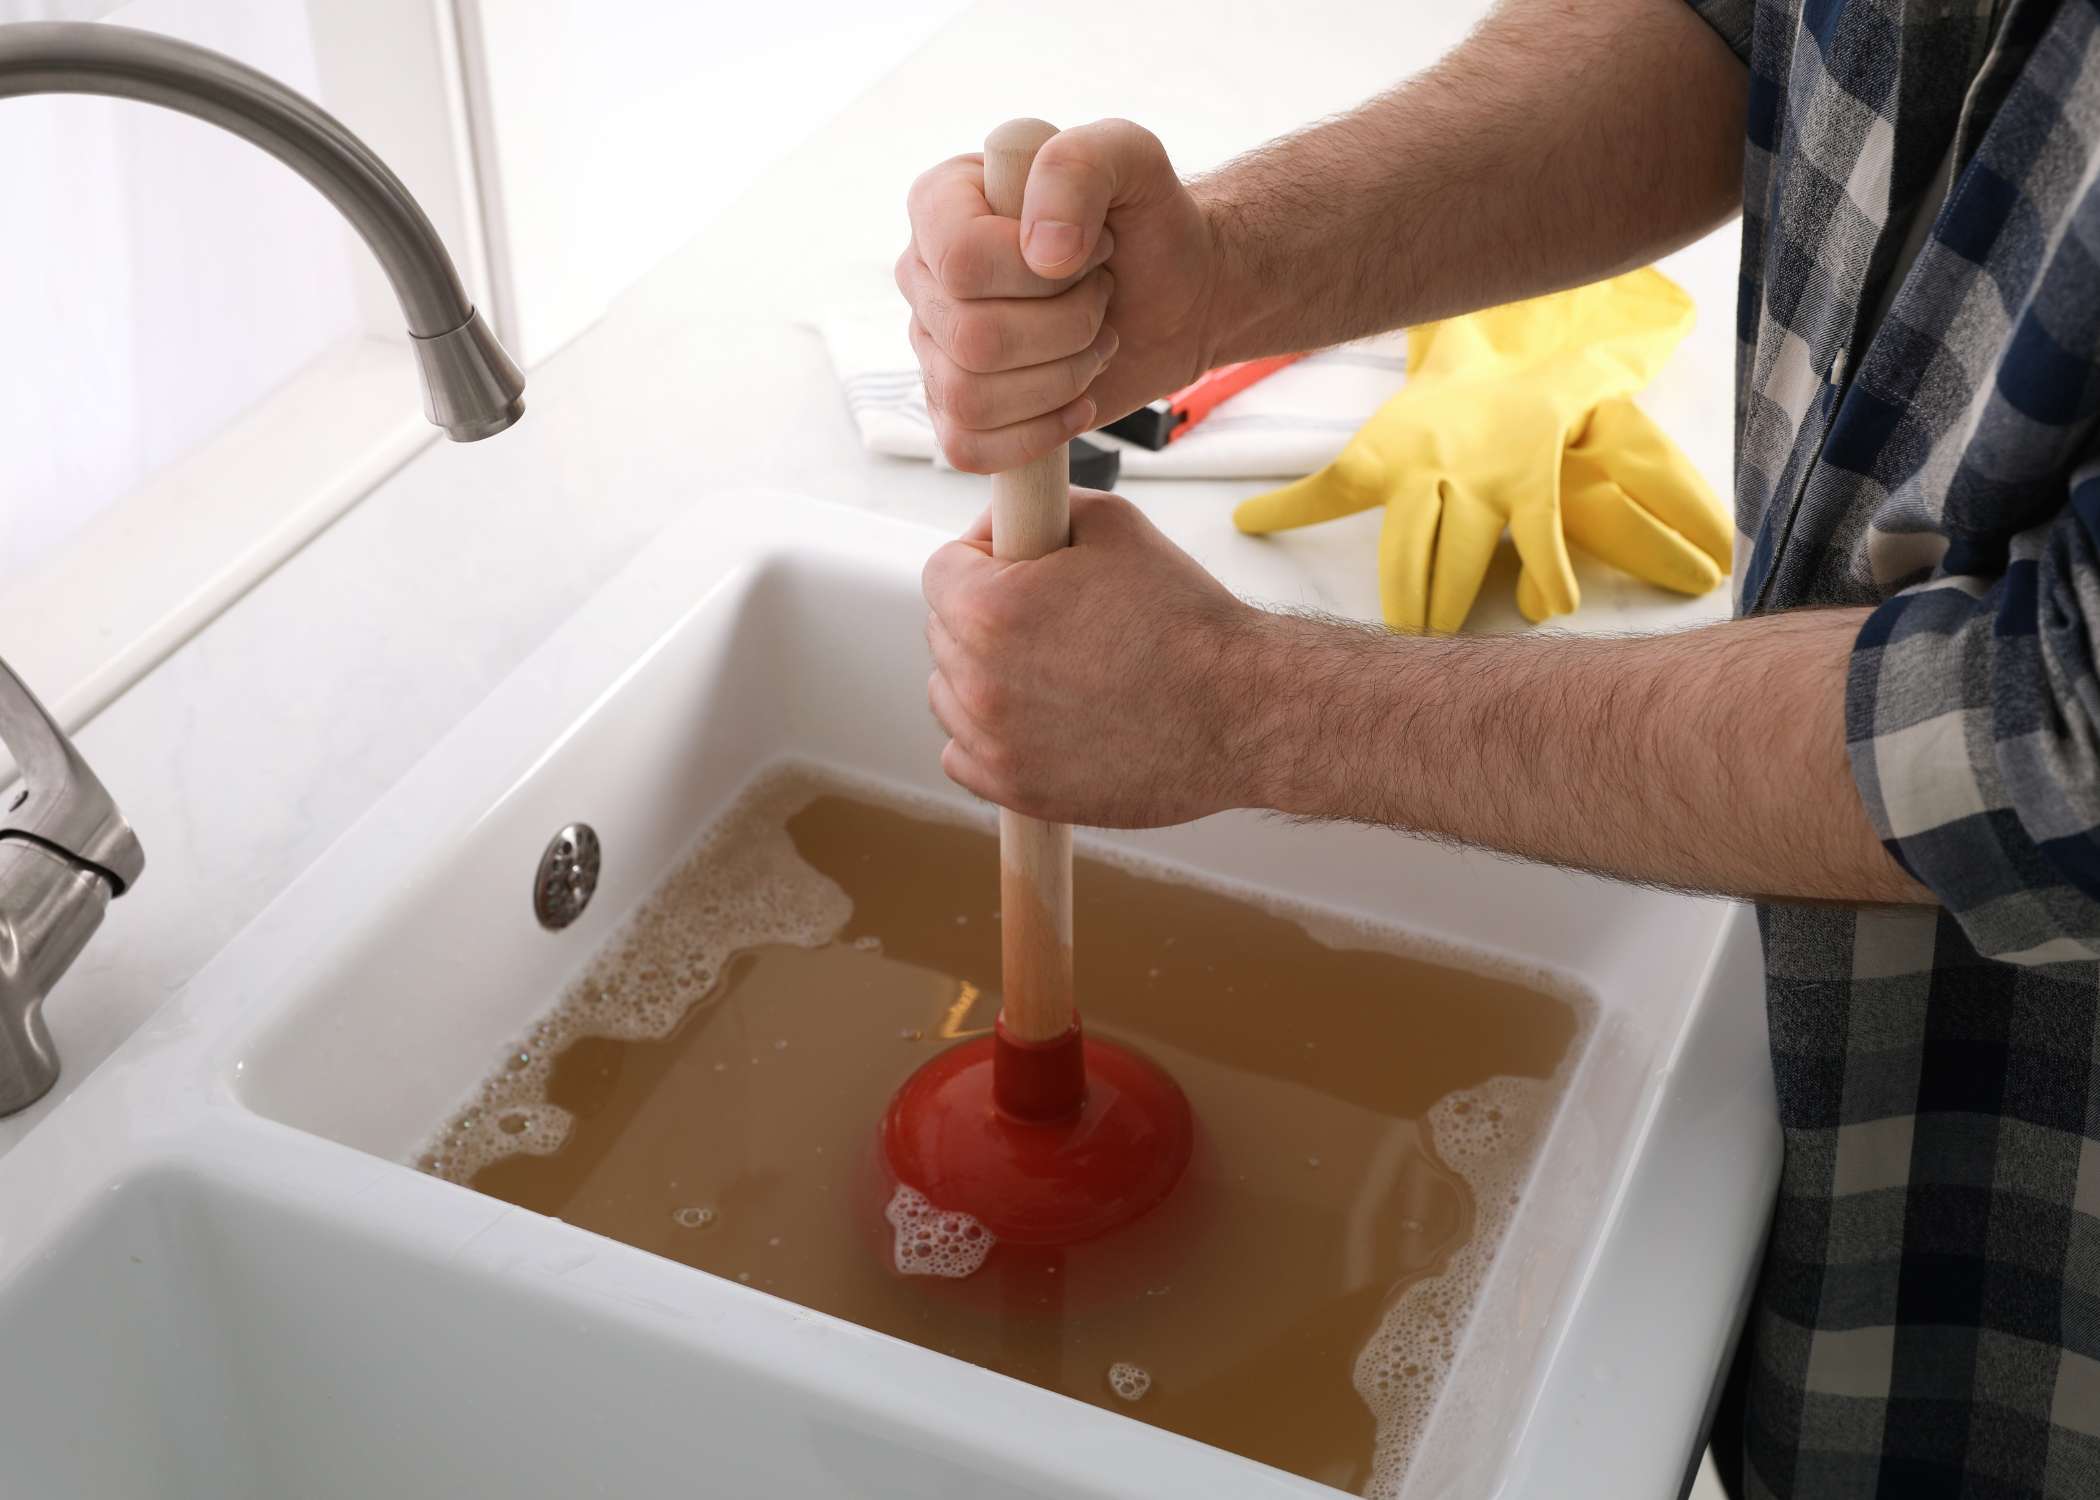 How to Unclog a Drain DIY Methods and When to Call a Plumber